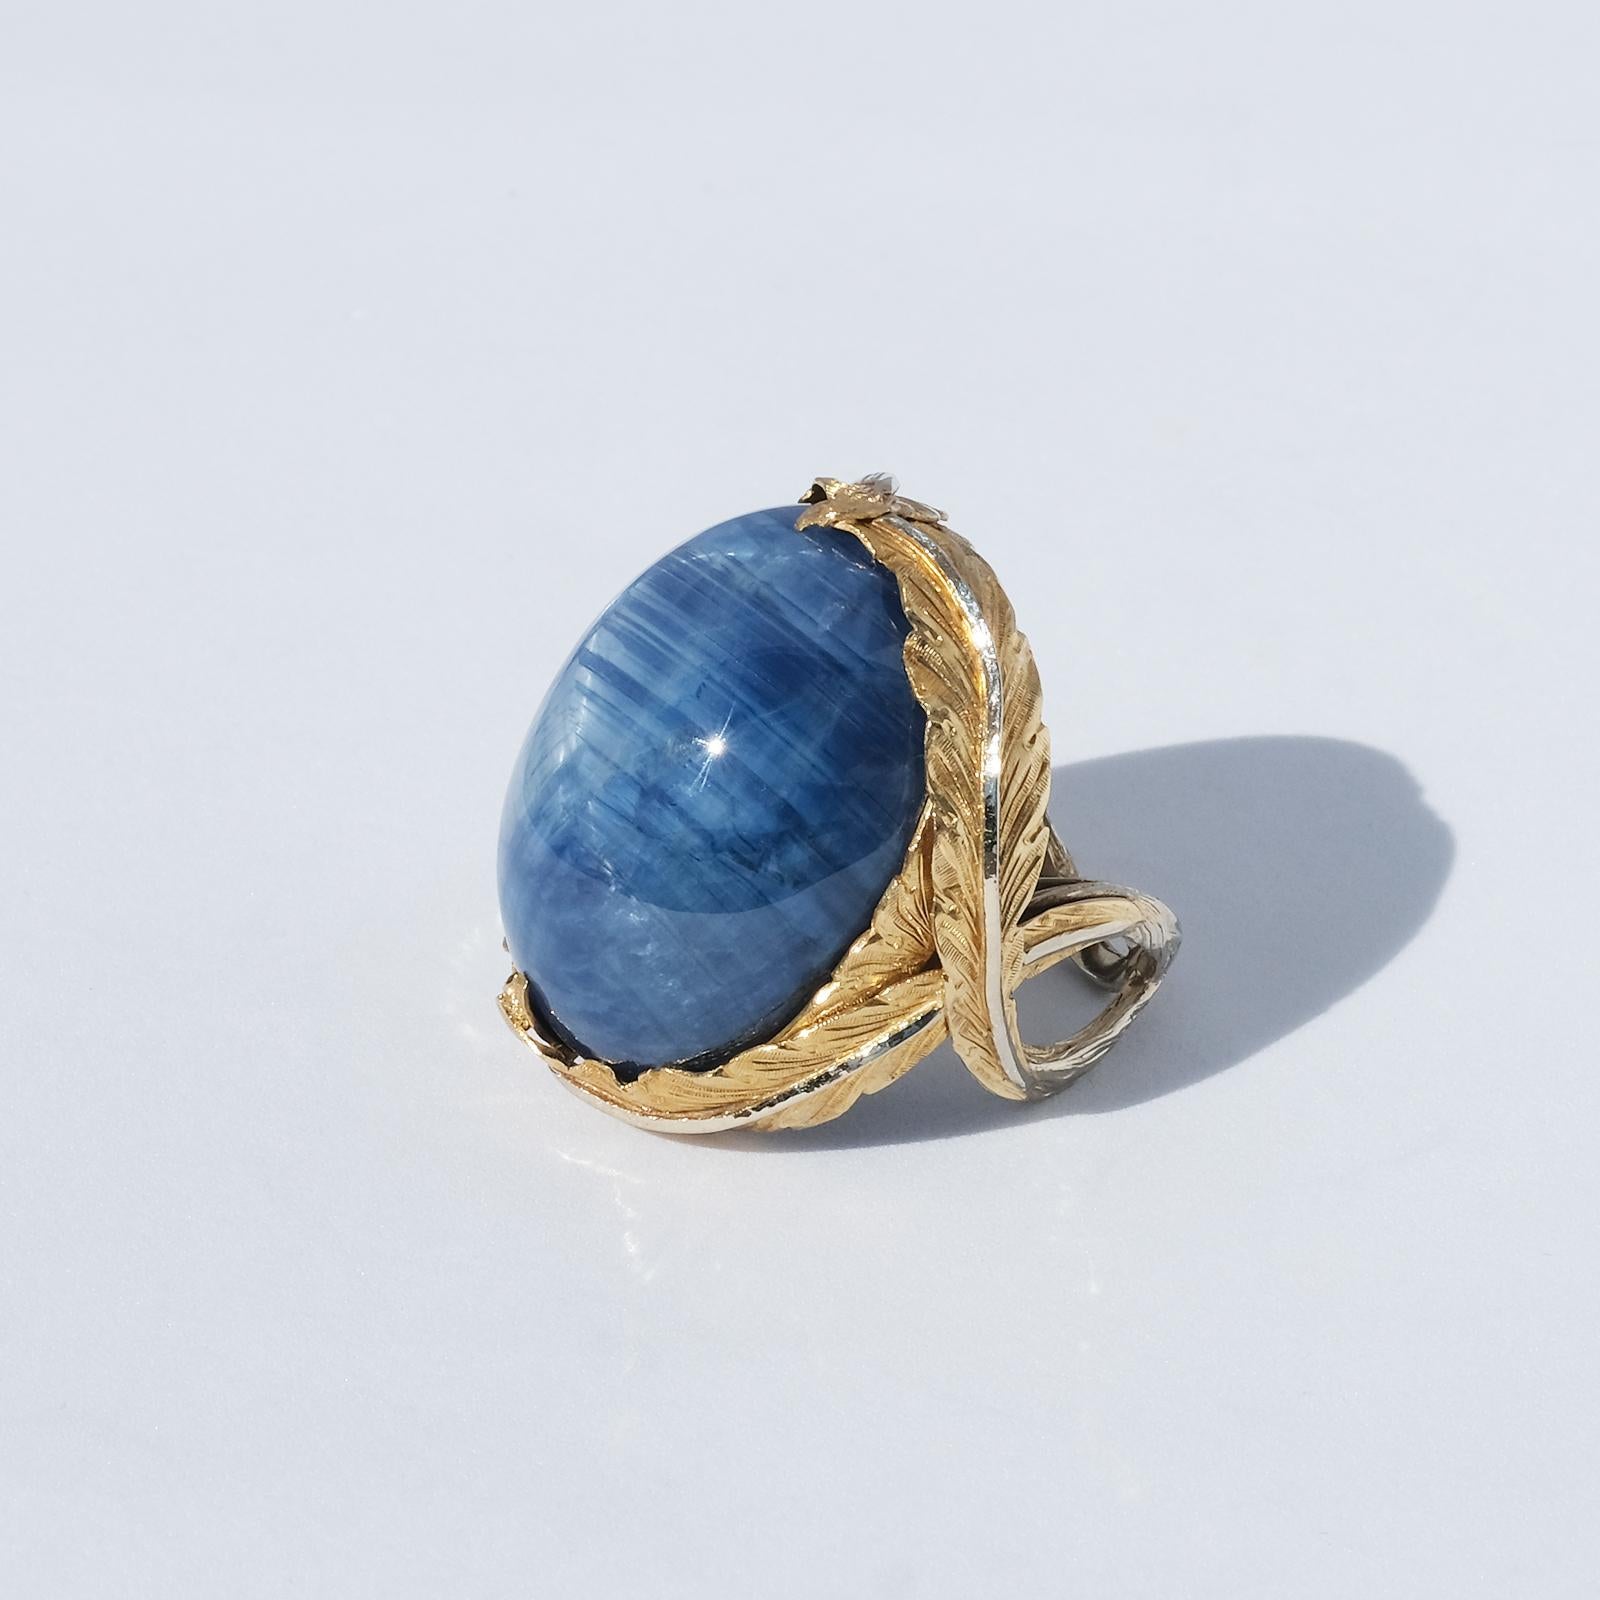 Designer: Kristina Karlsson (d. year 2000)

Year: 1990s

This amazing very large gold and partly silvered ring has a large cabochon polished sapphire and a setting which is adorned with a beautiful golden laurel wreath. The ring looks like a